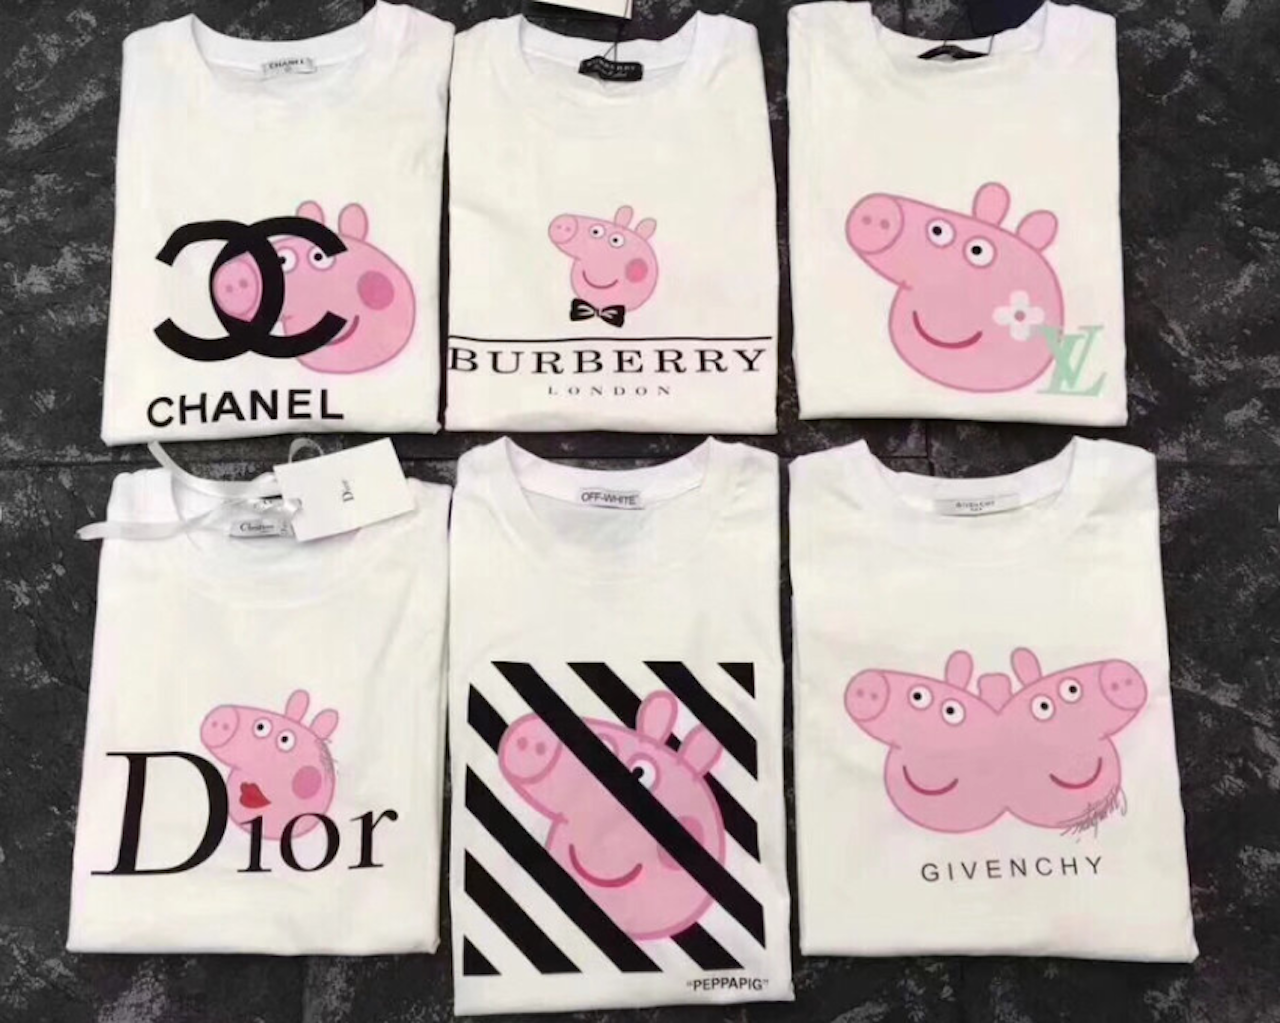 The Peppa Pig market, with 800 global licenses, is so lucrative it has spurred counterfeiters in China, some that entwine the pig with brand logos from Dior and Supreme. Photo: Little Red Book/Ice